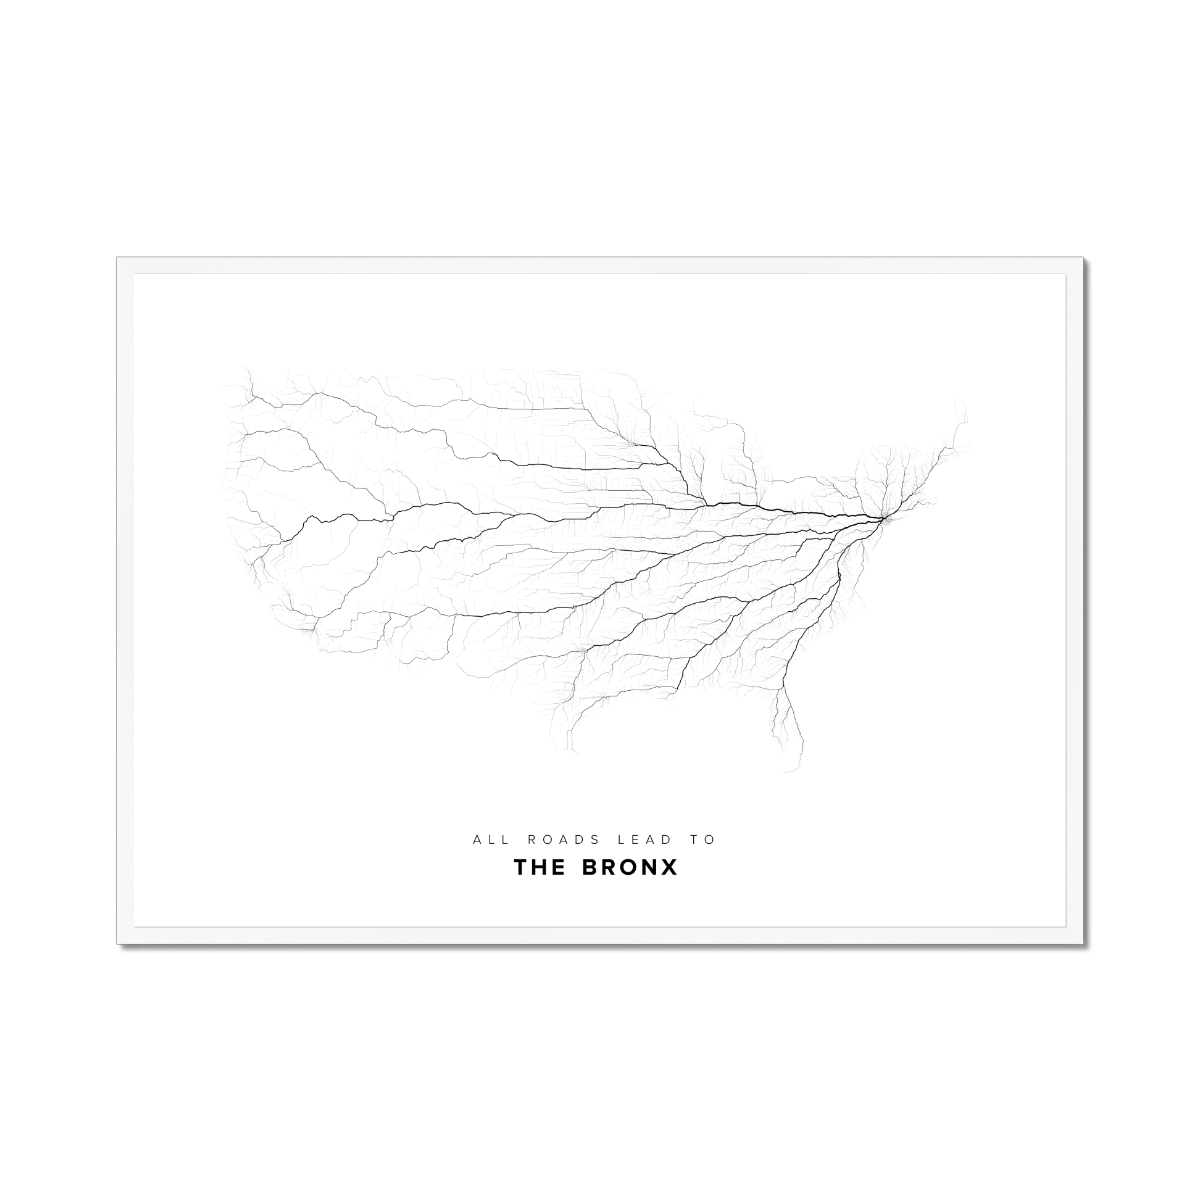 All roads lead to The Bronx (United States of America) Fine Art Map Print